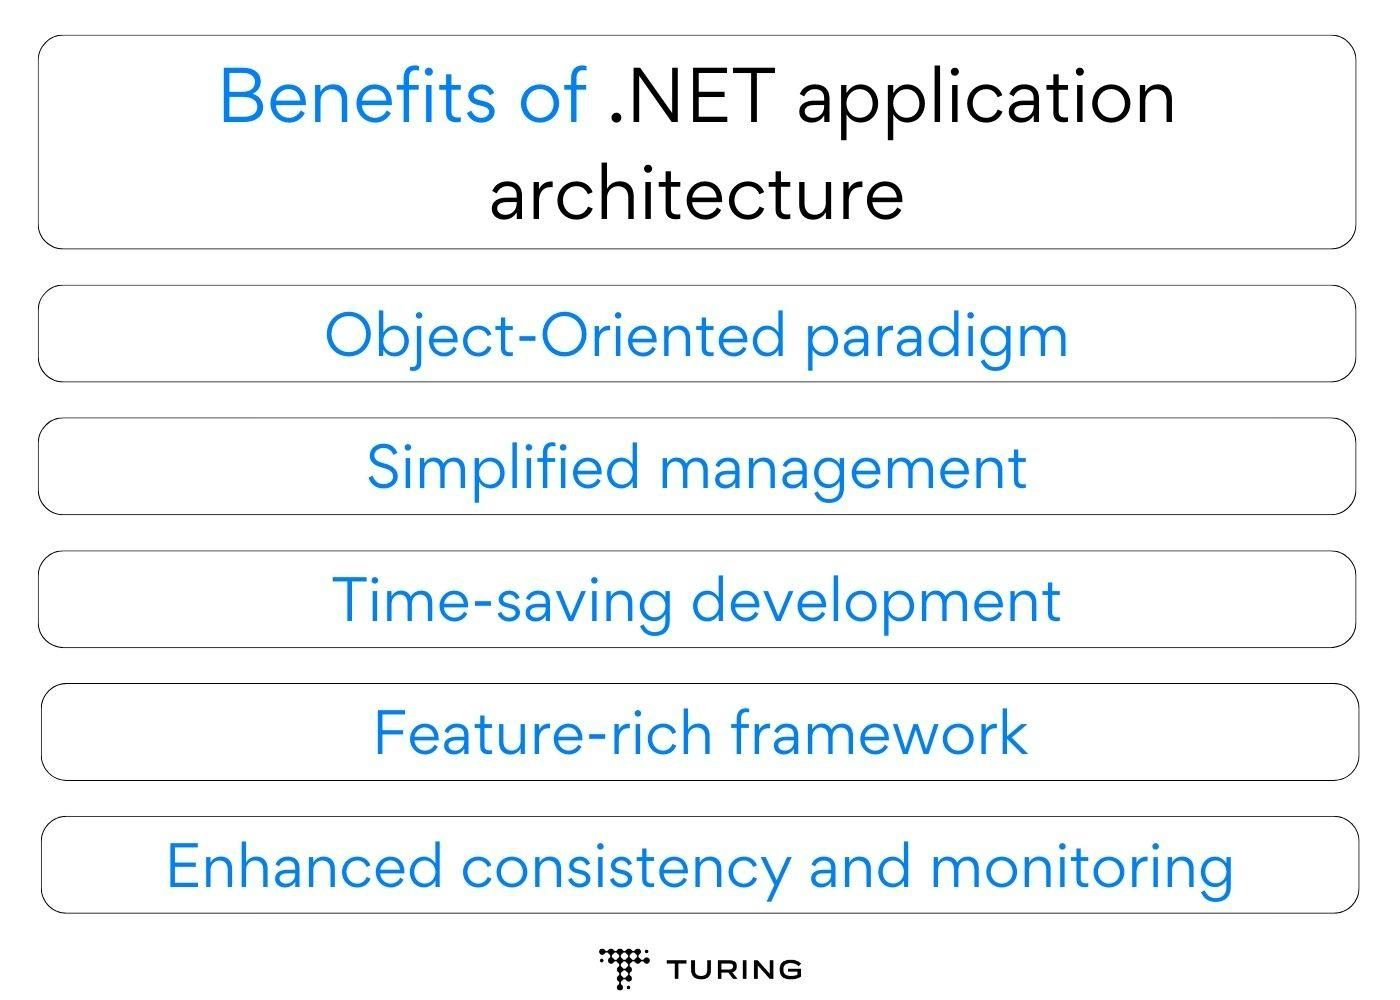 Benefits of .NET application architecture